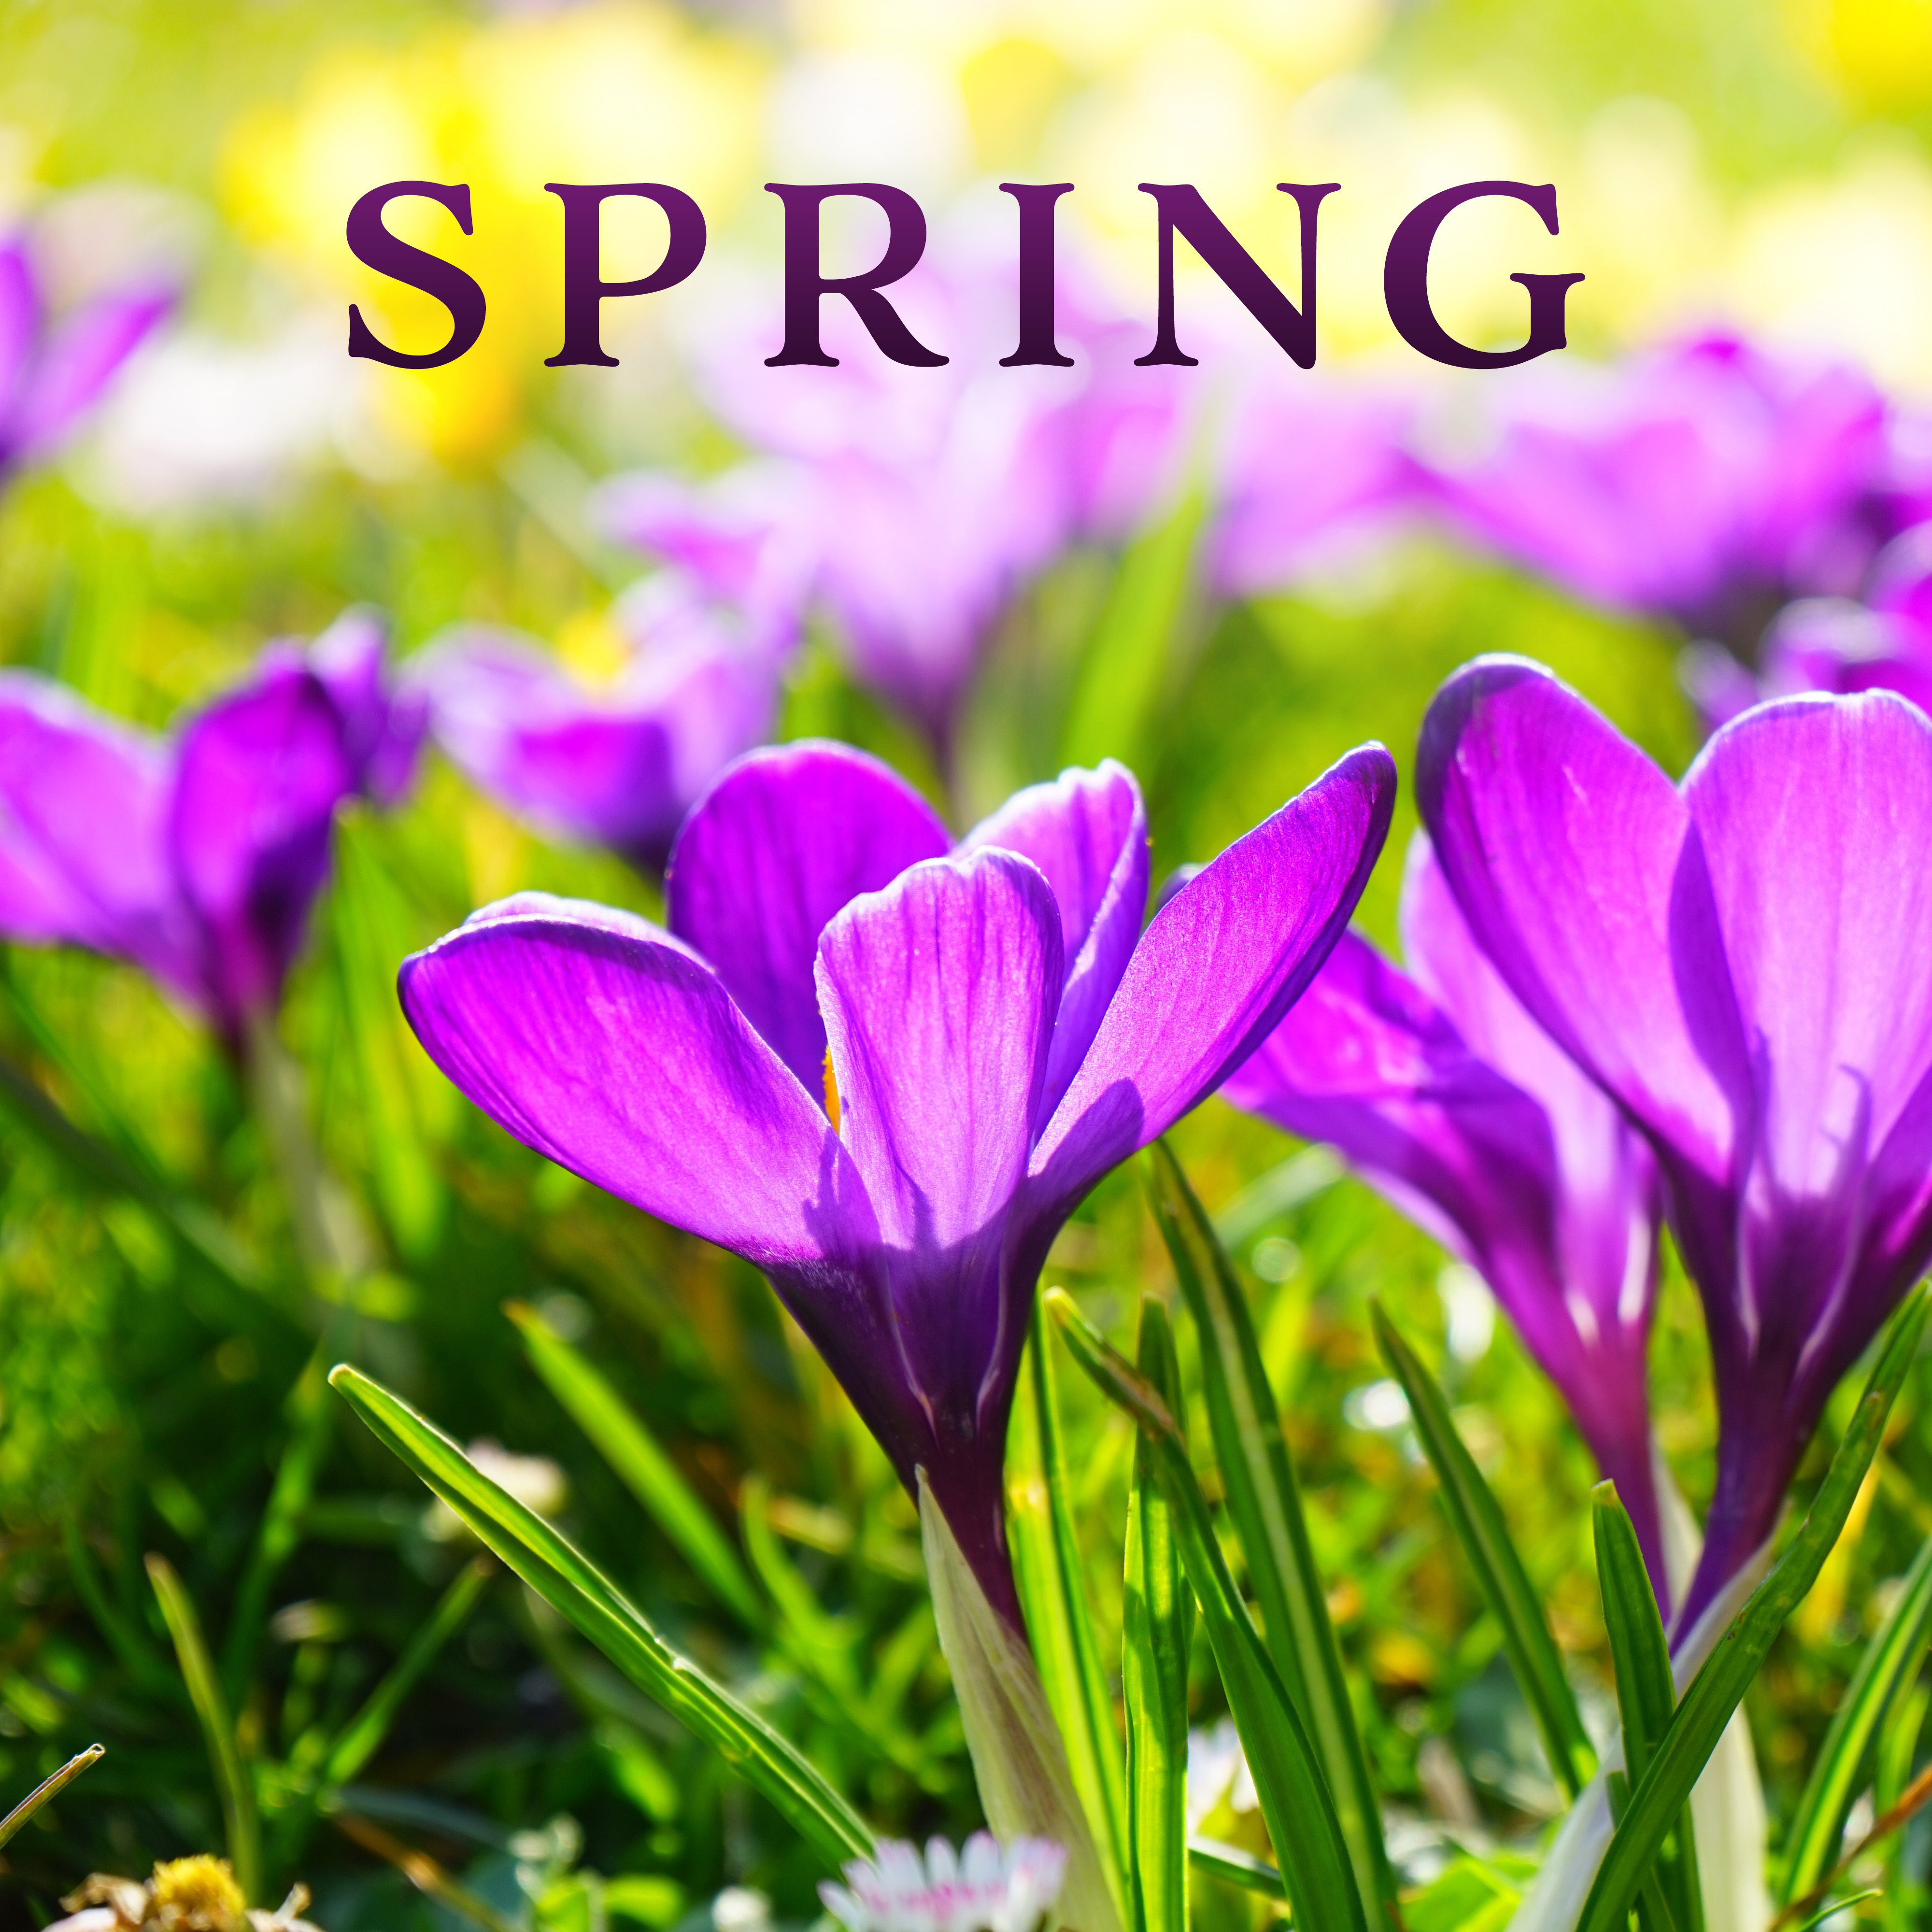 Spring – Relaxed Sounds, Instrumental, Meditation Music, Yoga, Nature Sounds